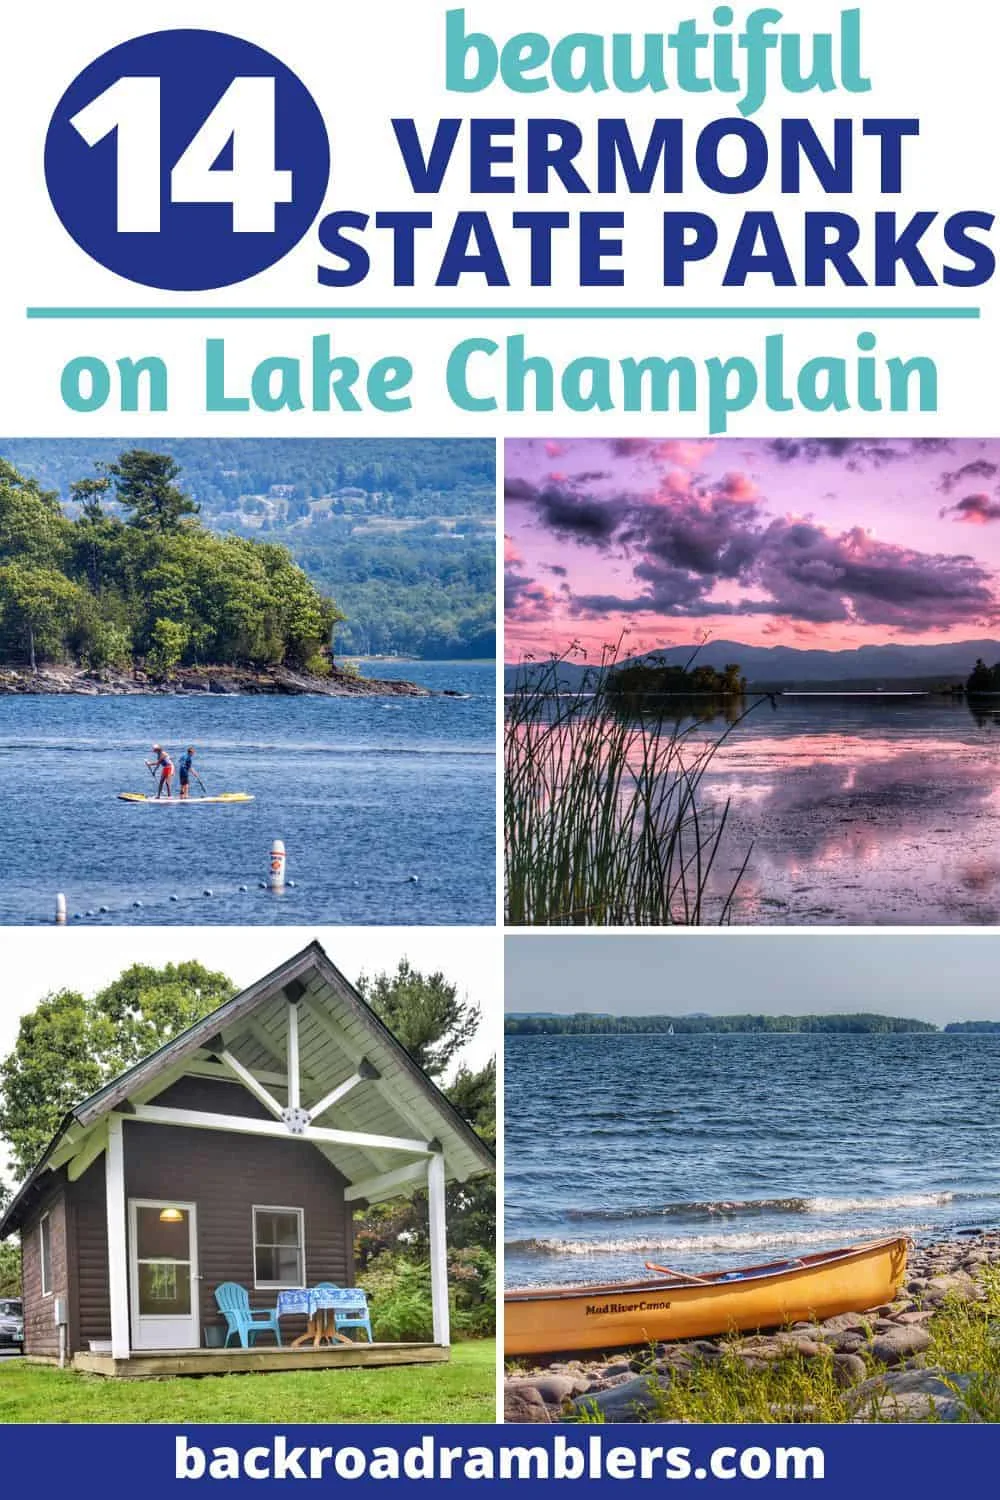 A collage of photos featuring Vermont State Parks on Lake Champlain. Text overlay: The Best State Parks on Lake Champlain.
